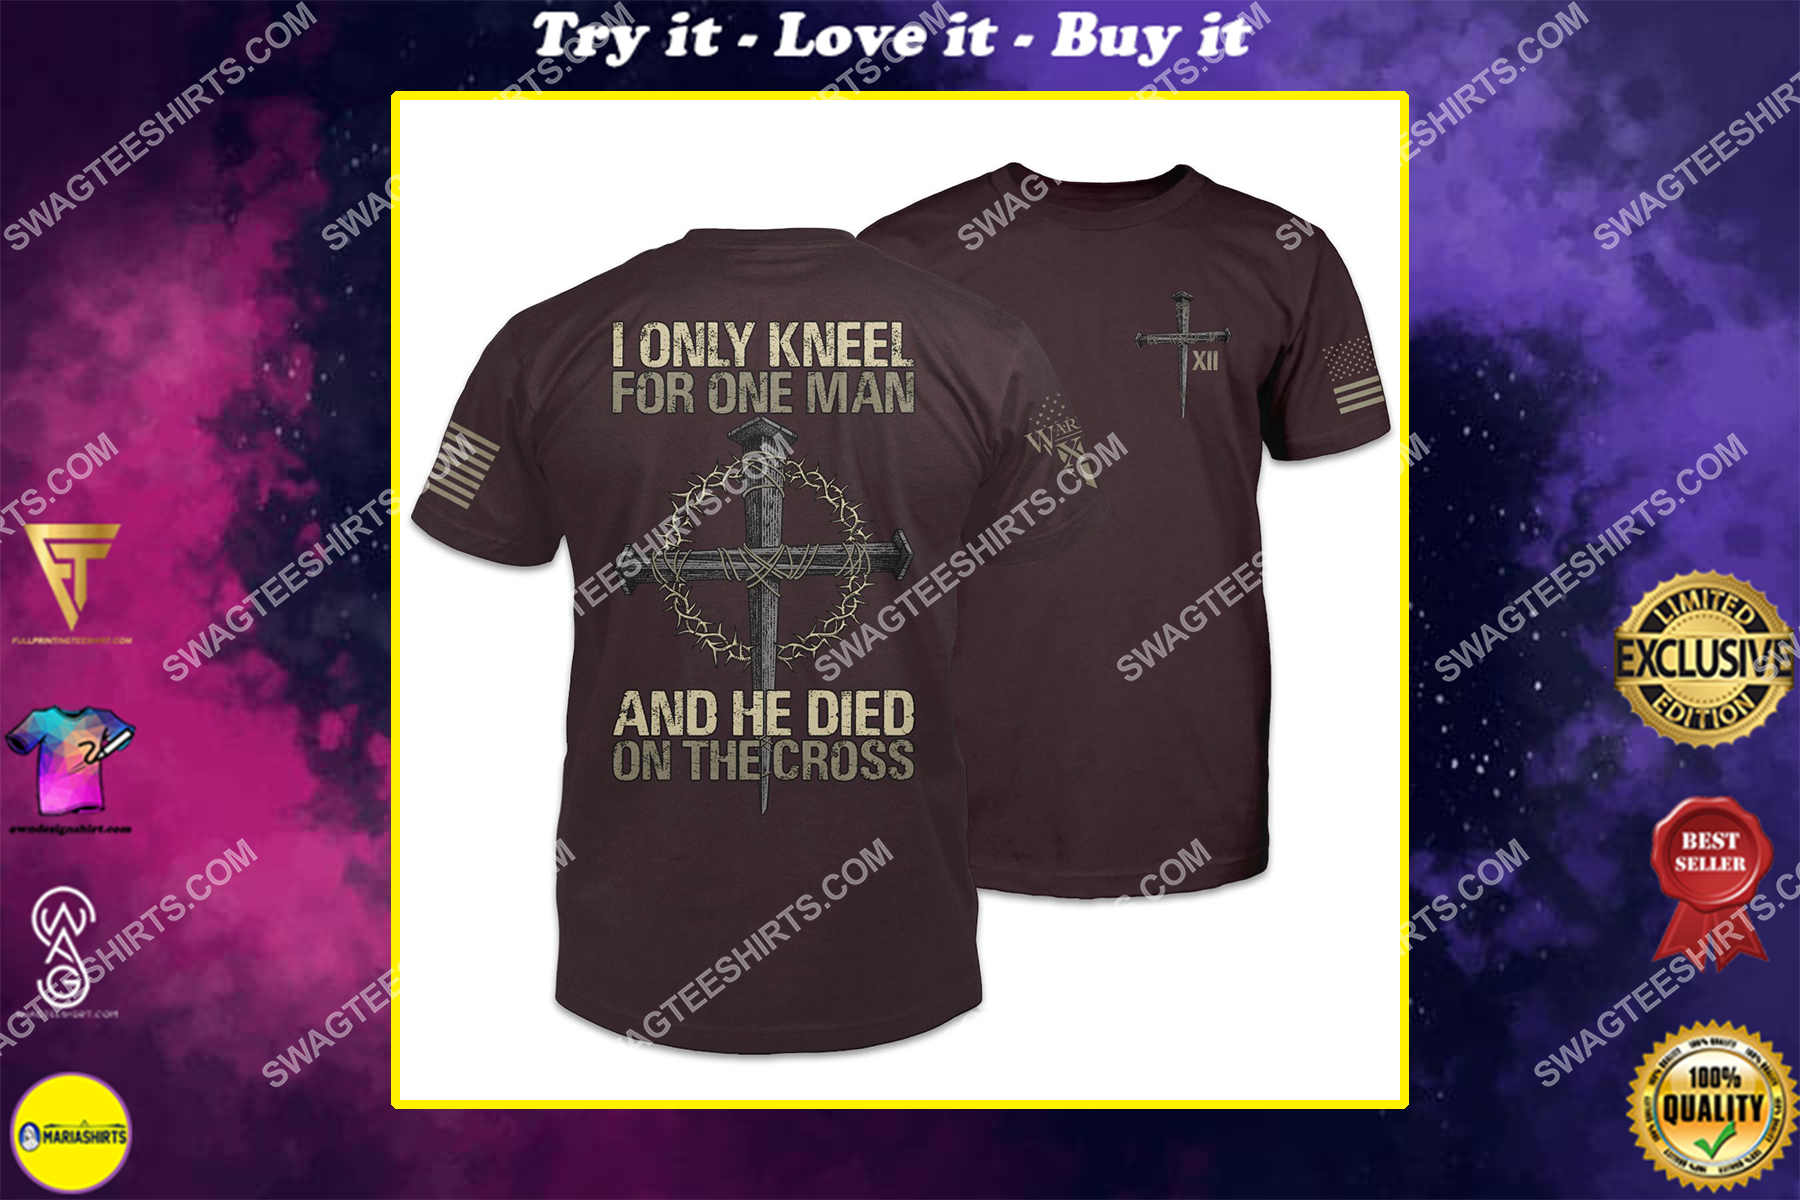 we only kneel for one man and he died on the cross shirt